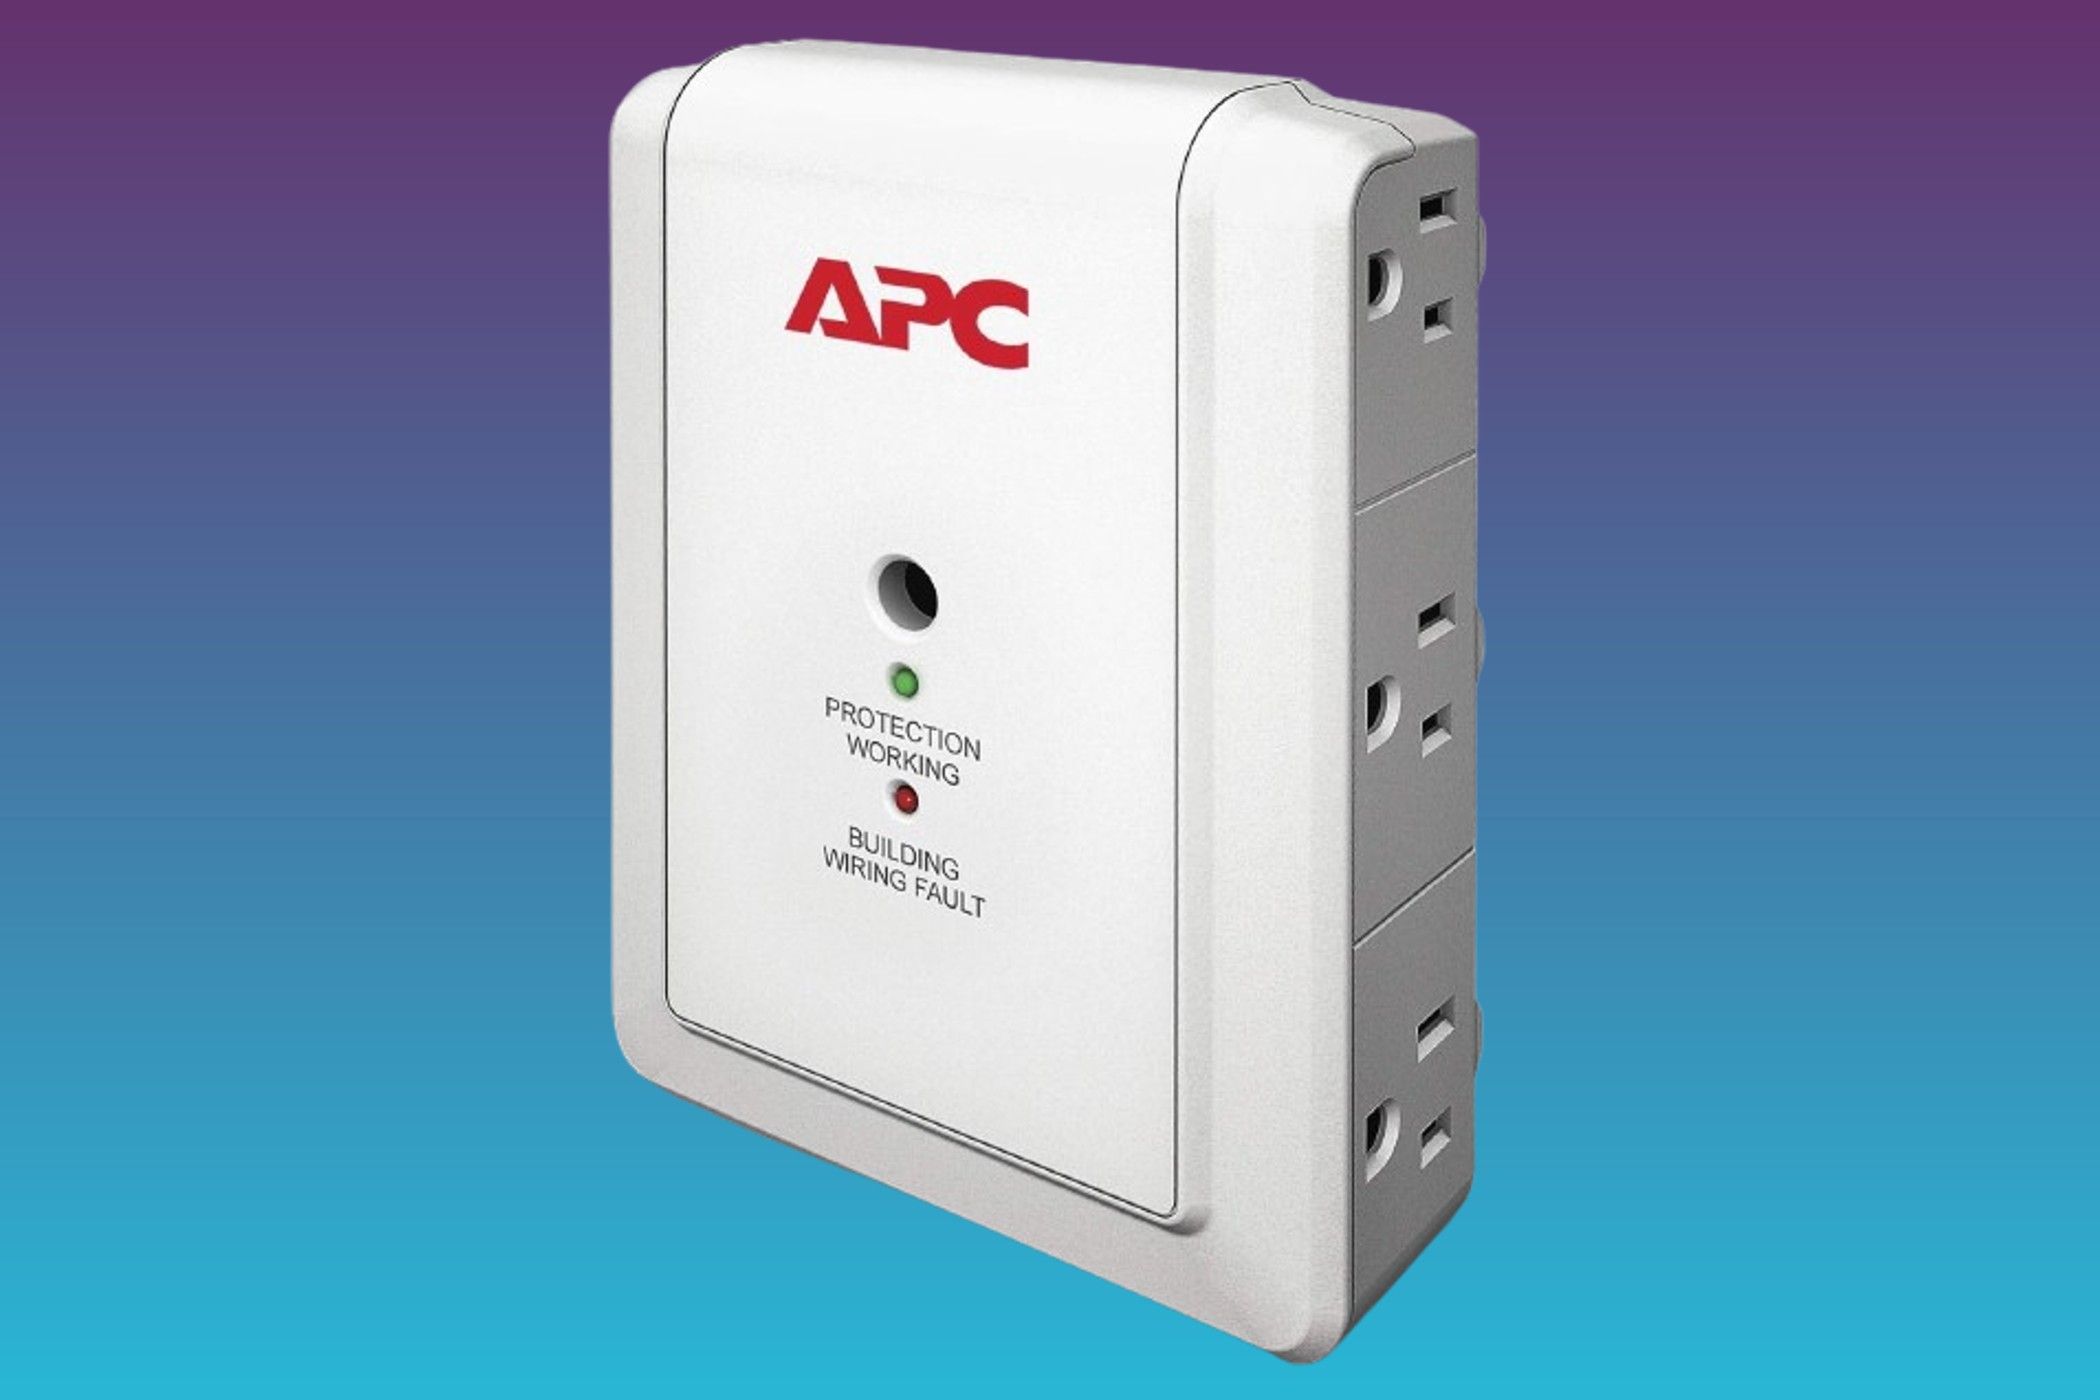 APC Surge Protector P6W on a gradient background